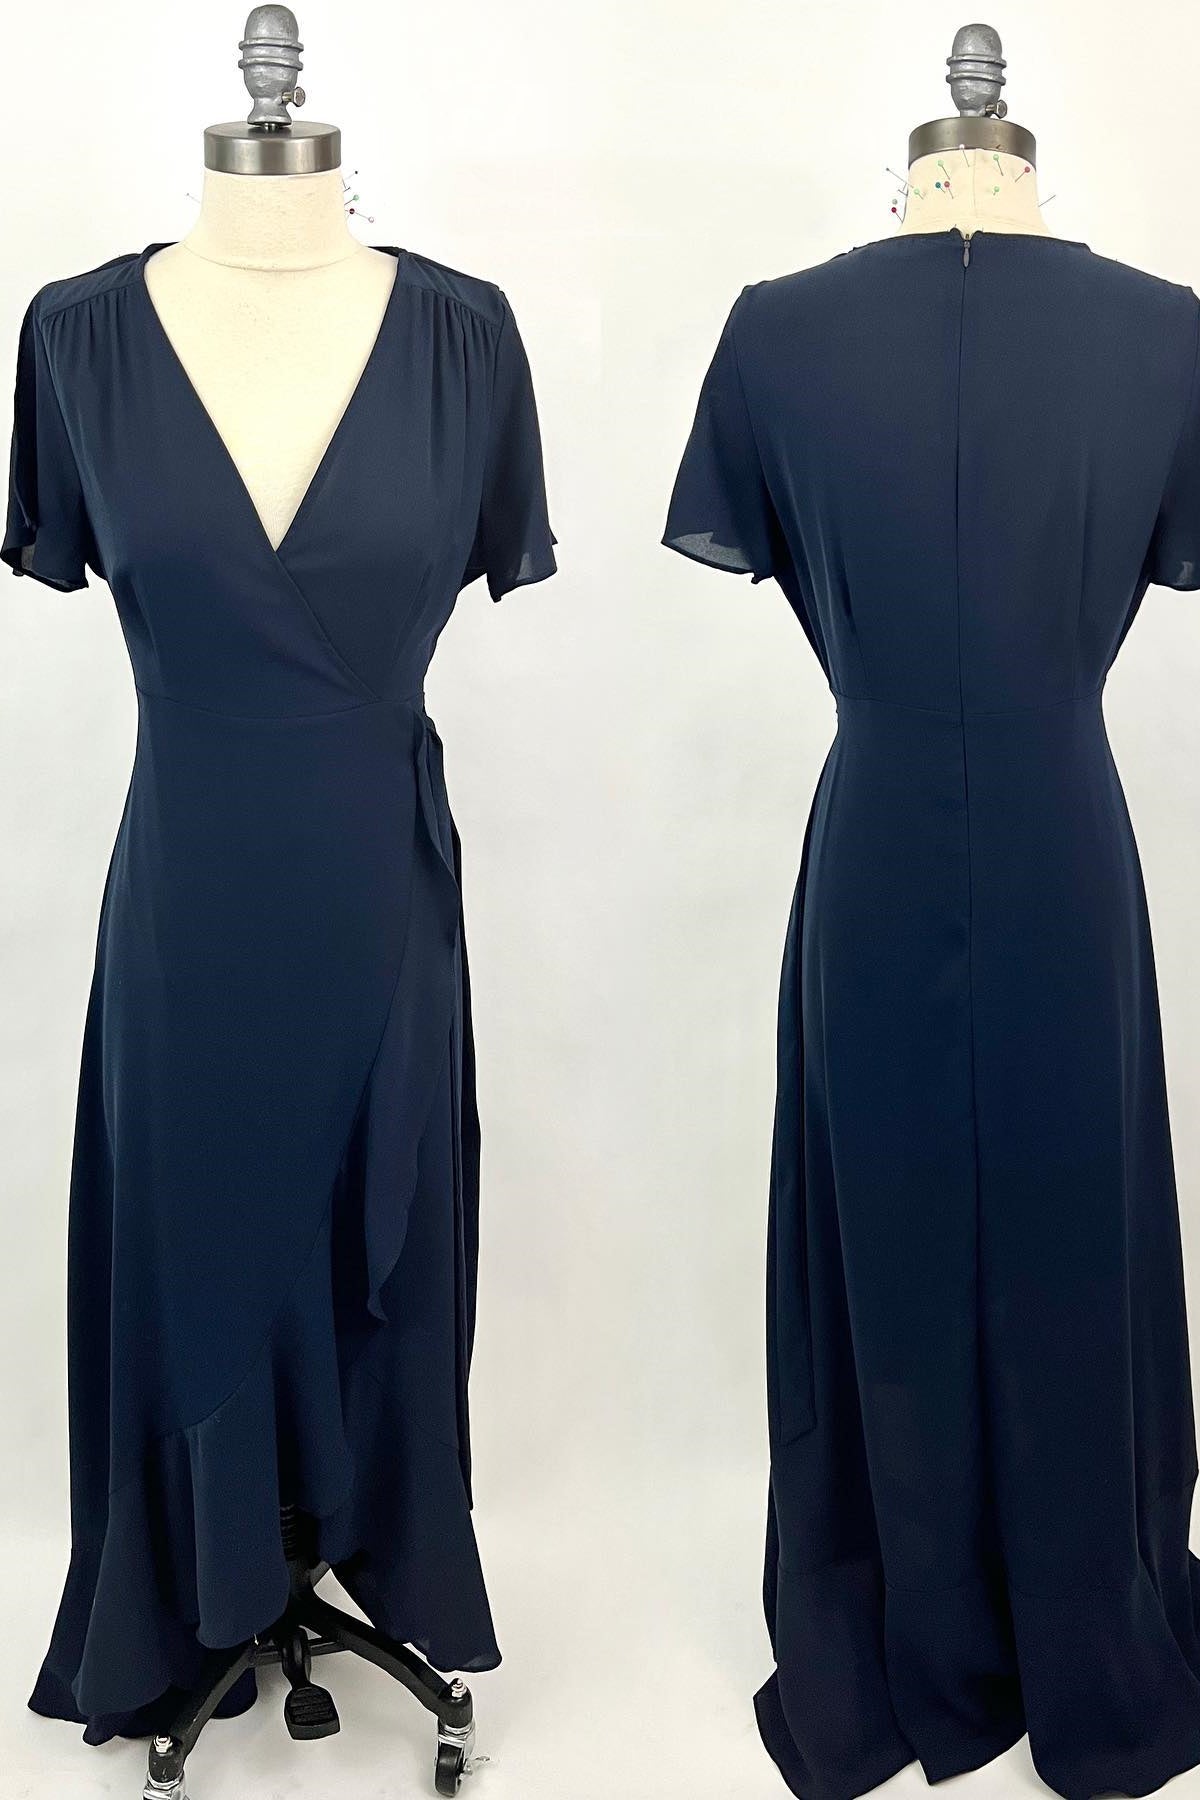 Prom Dresses With Sleeve, Short Sleeves Navy Blue Chiffon A-line Long Bridesmaid Dress